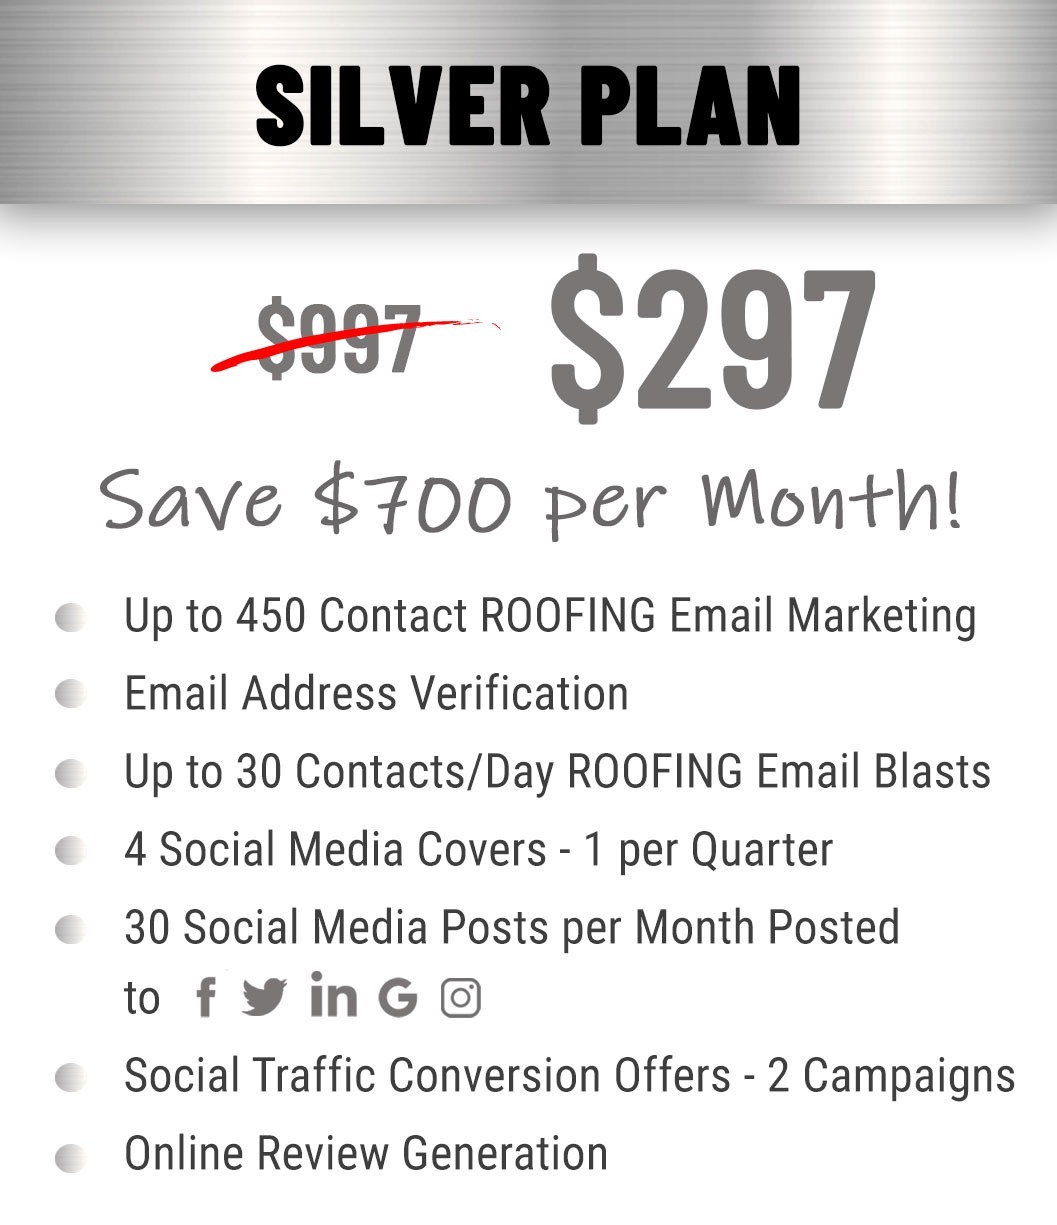 Silver Plan Pricing and Features ROOFING